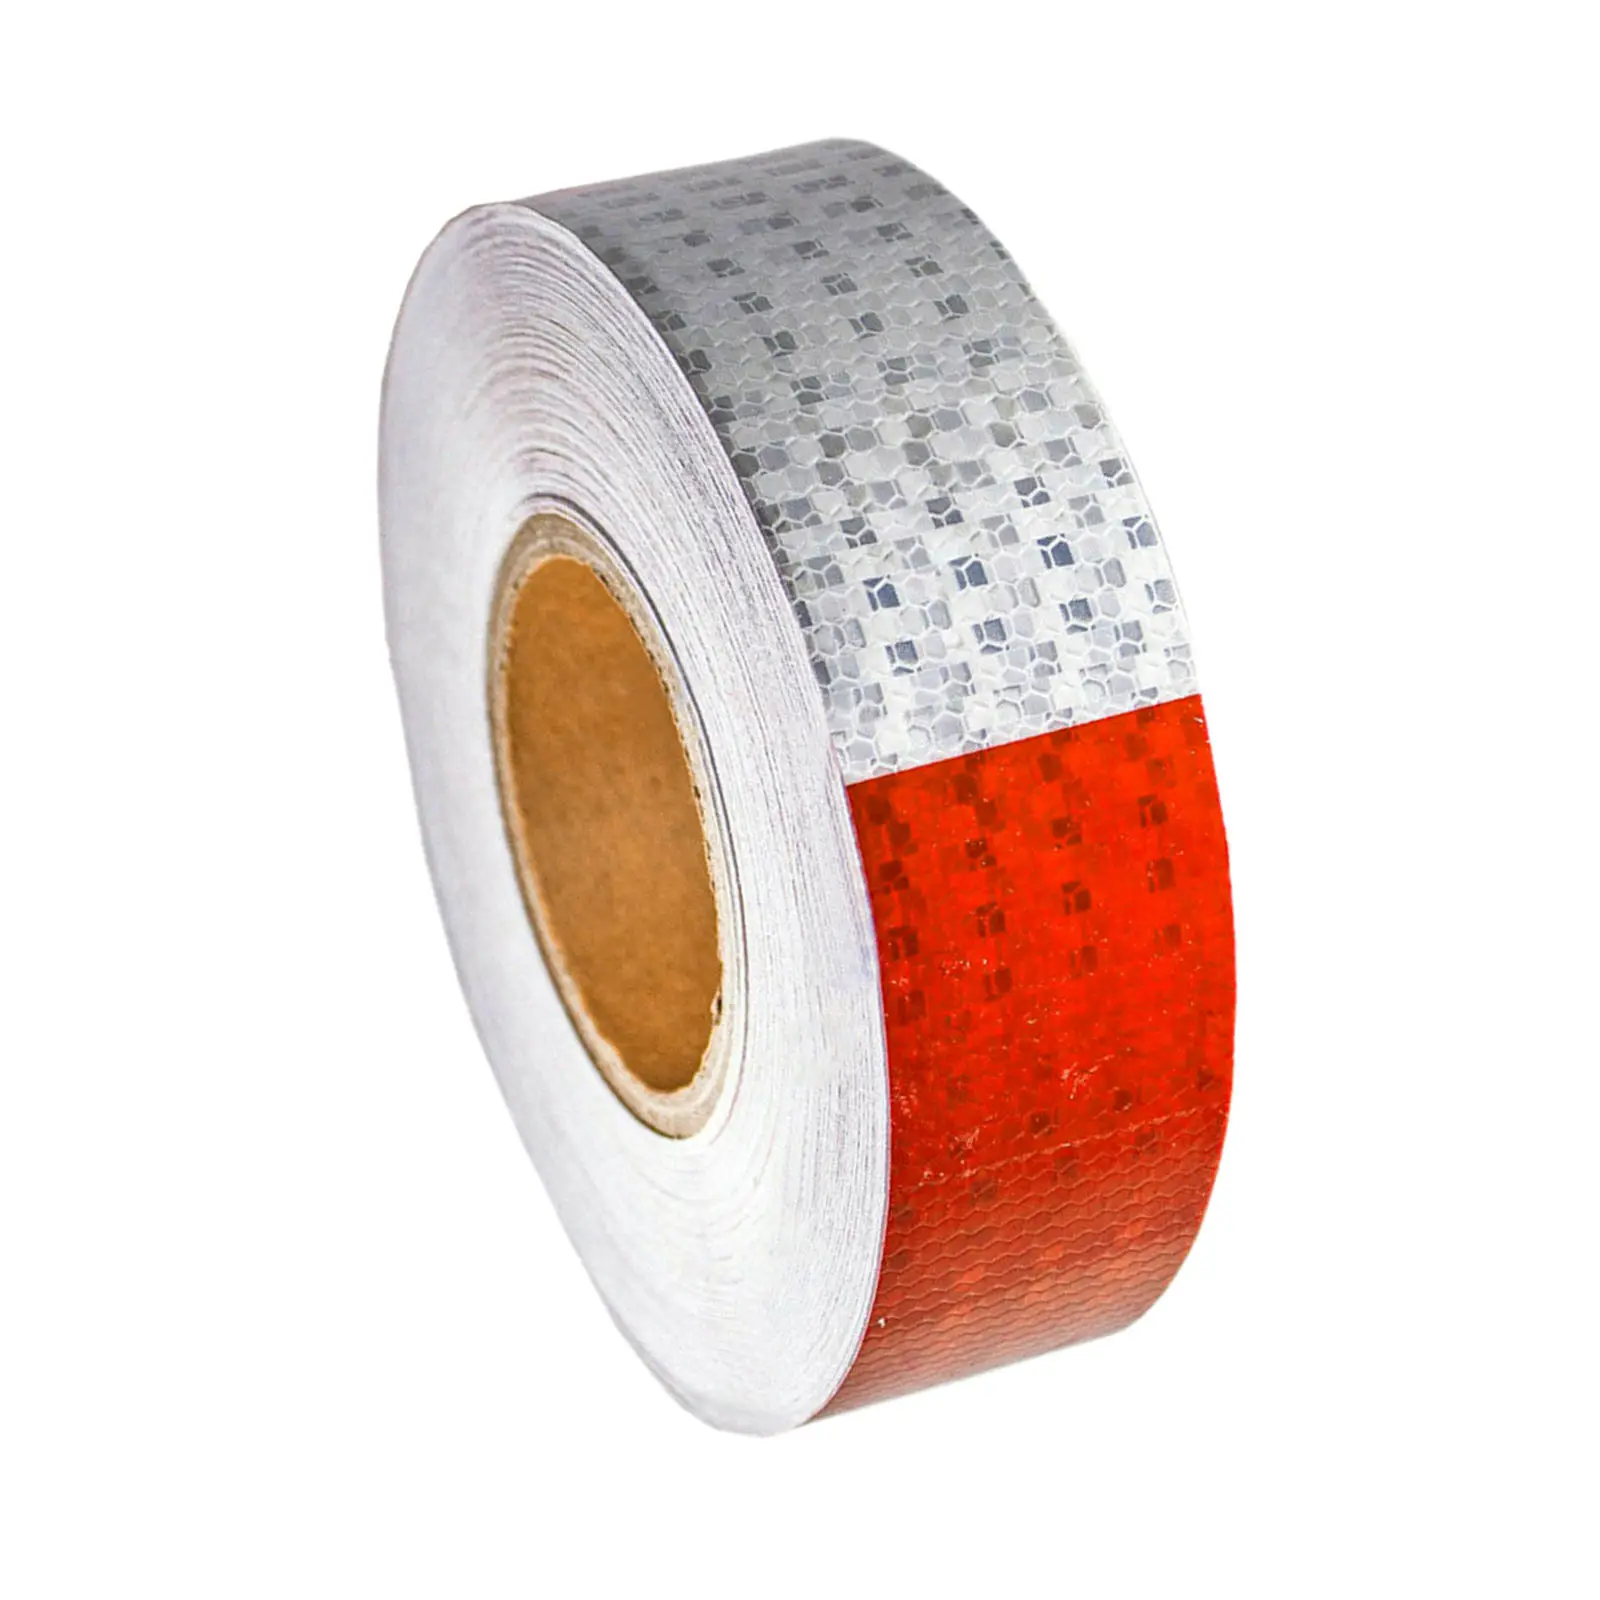 Reflective Tape Safety Caution Warning Reflective Adhesive Tape Sticker For Truck Motorcycle Bicycle Car Styling Decoration